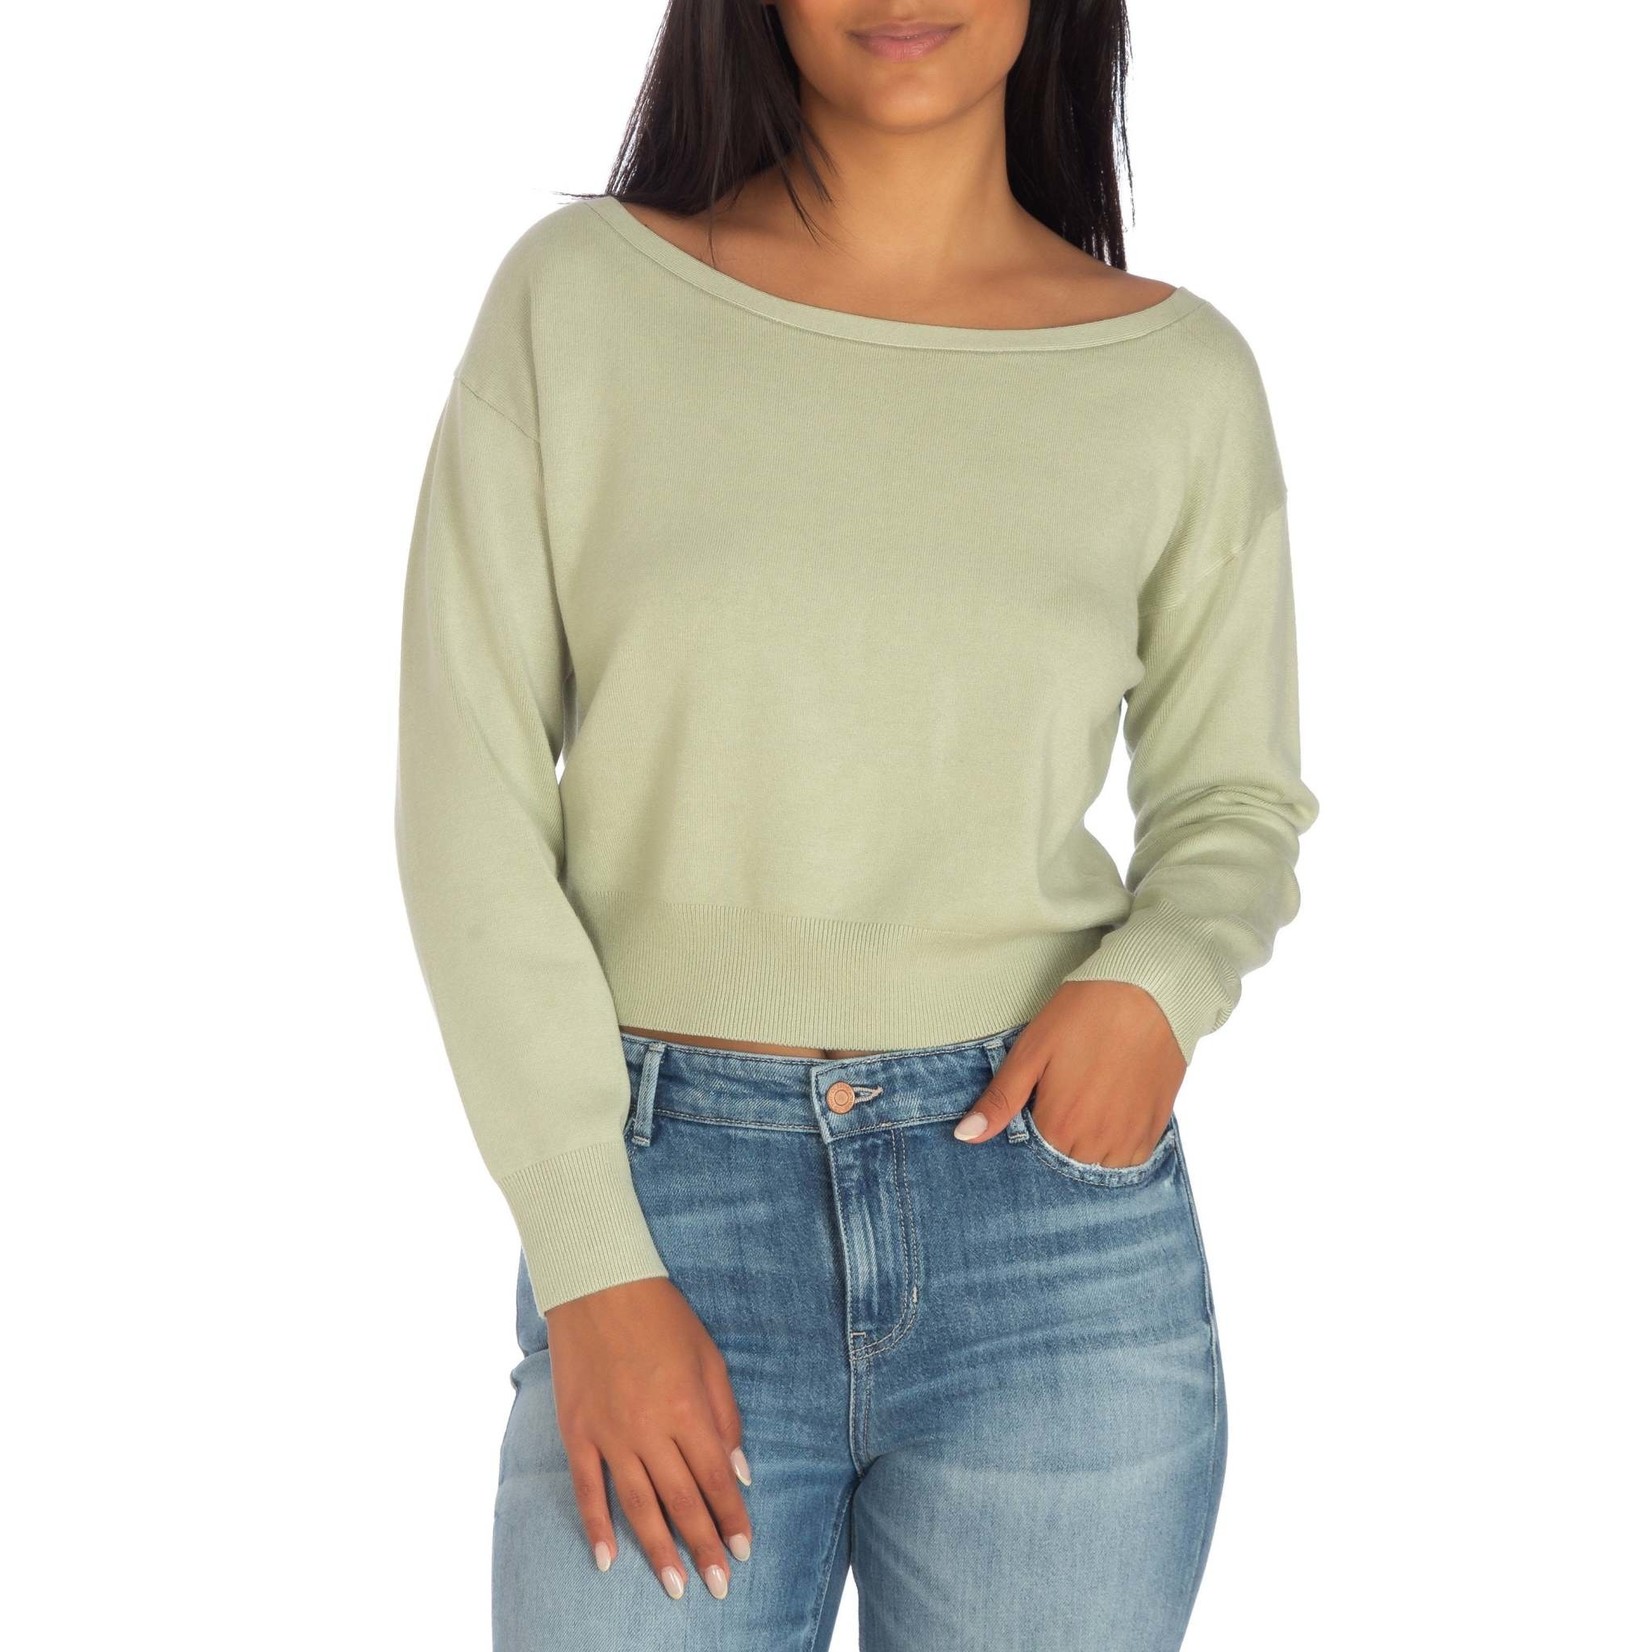 Guess Tiana Pullover